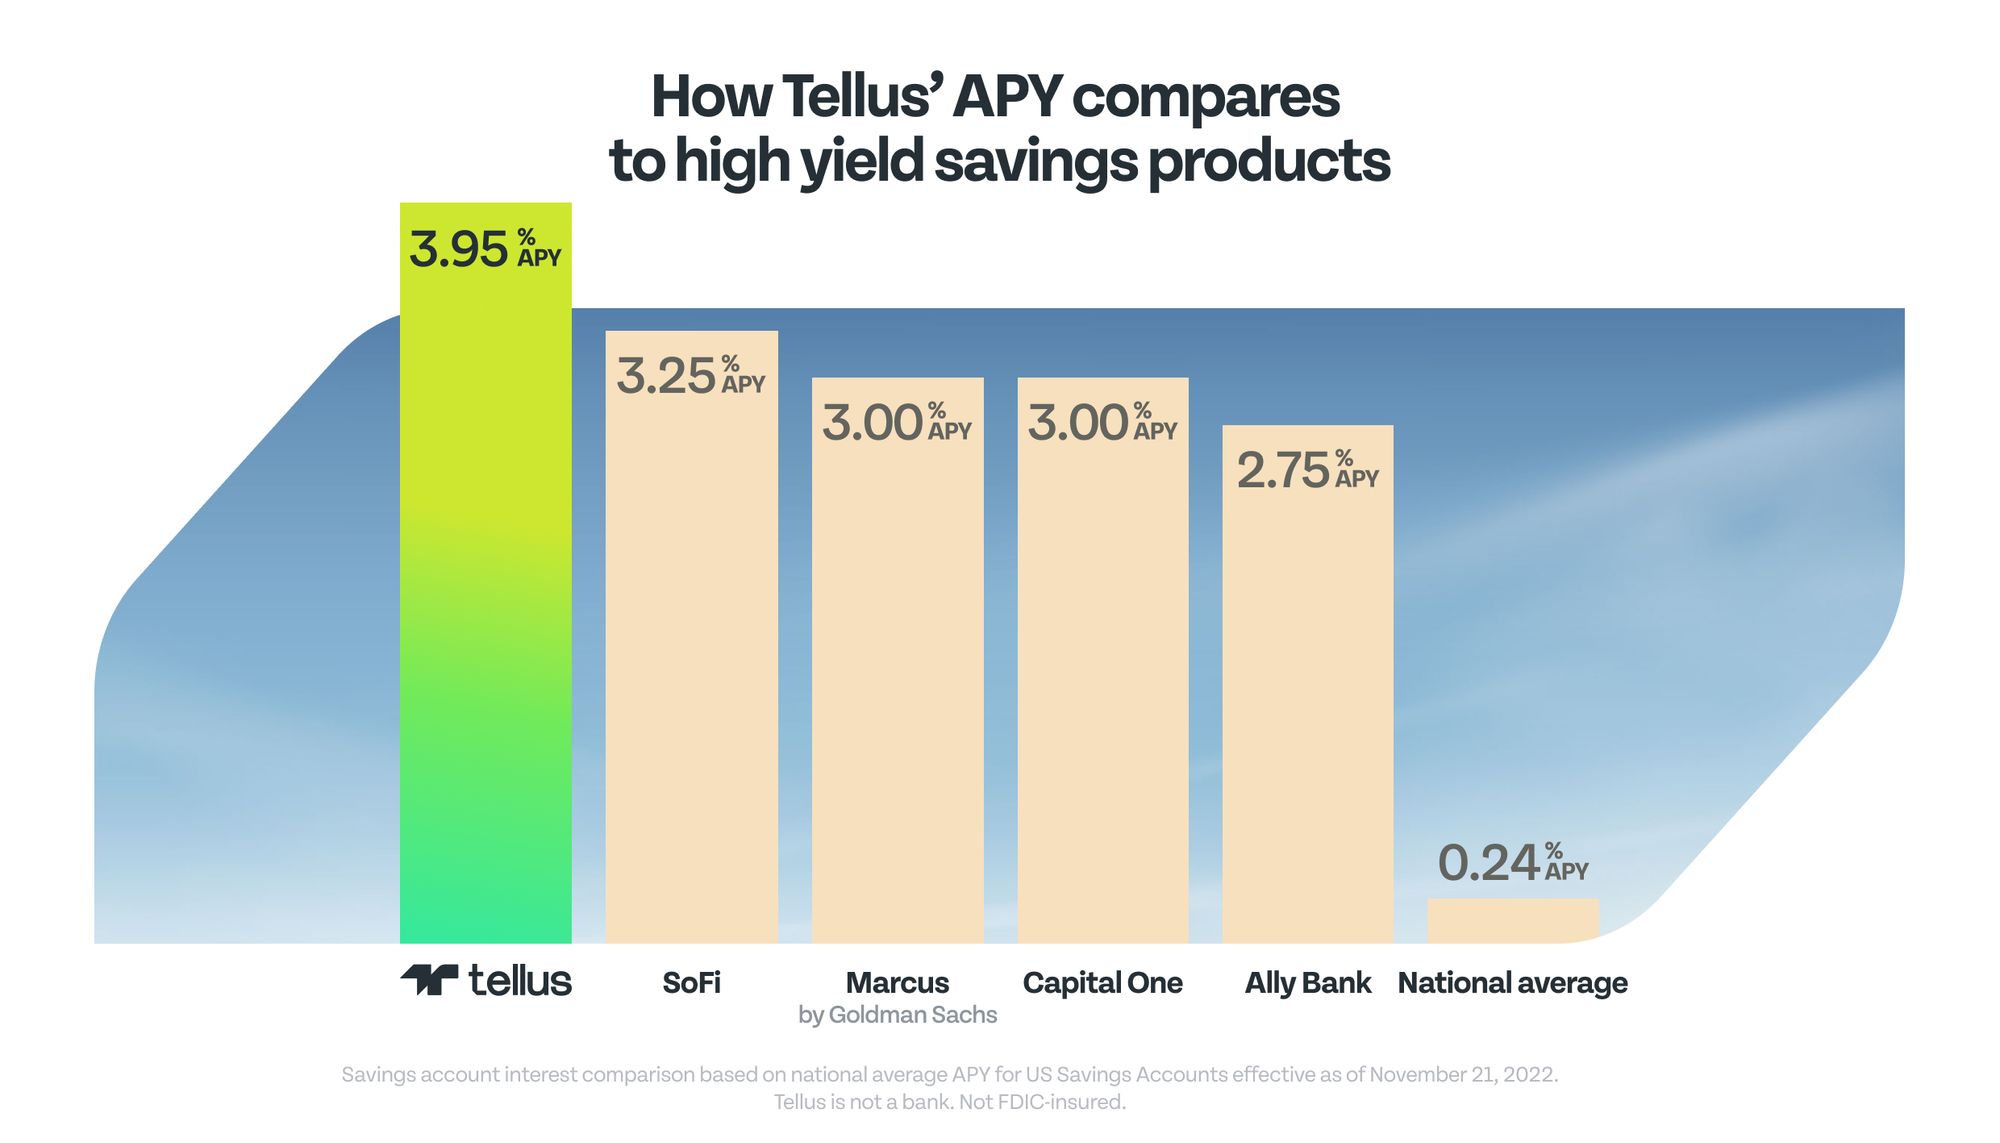 Table showing how Tellus compares products